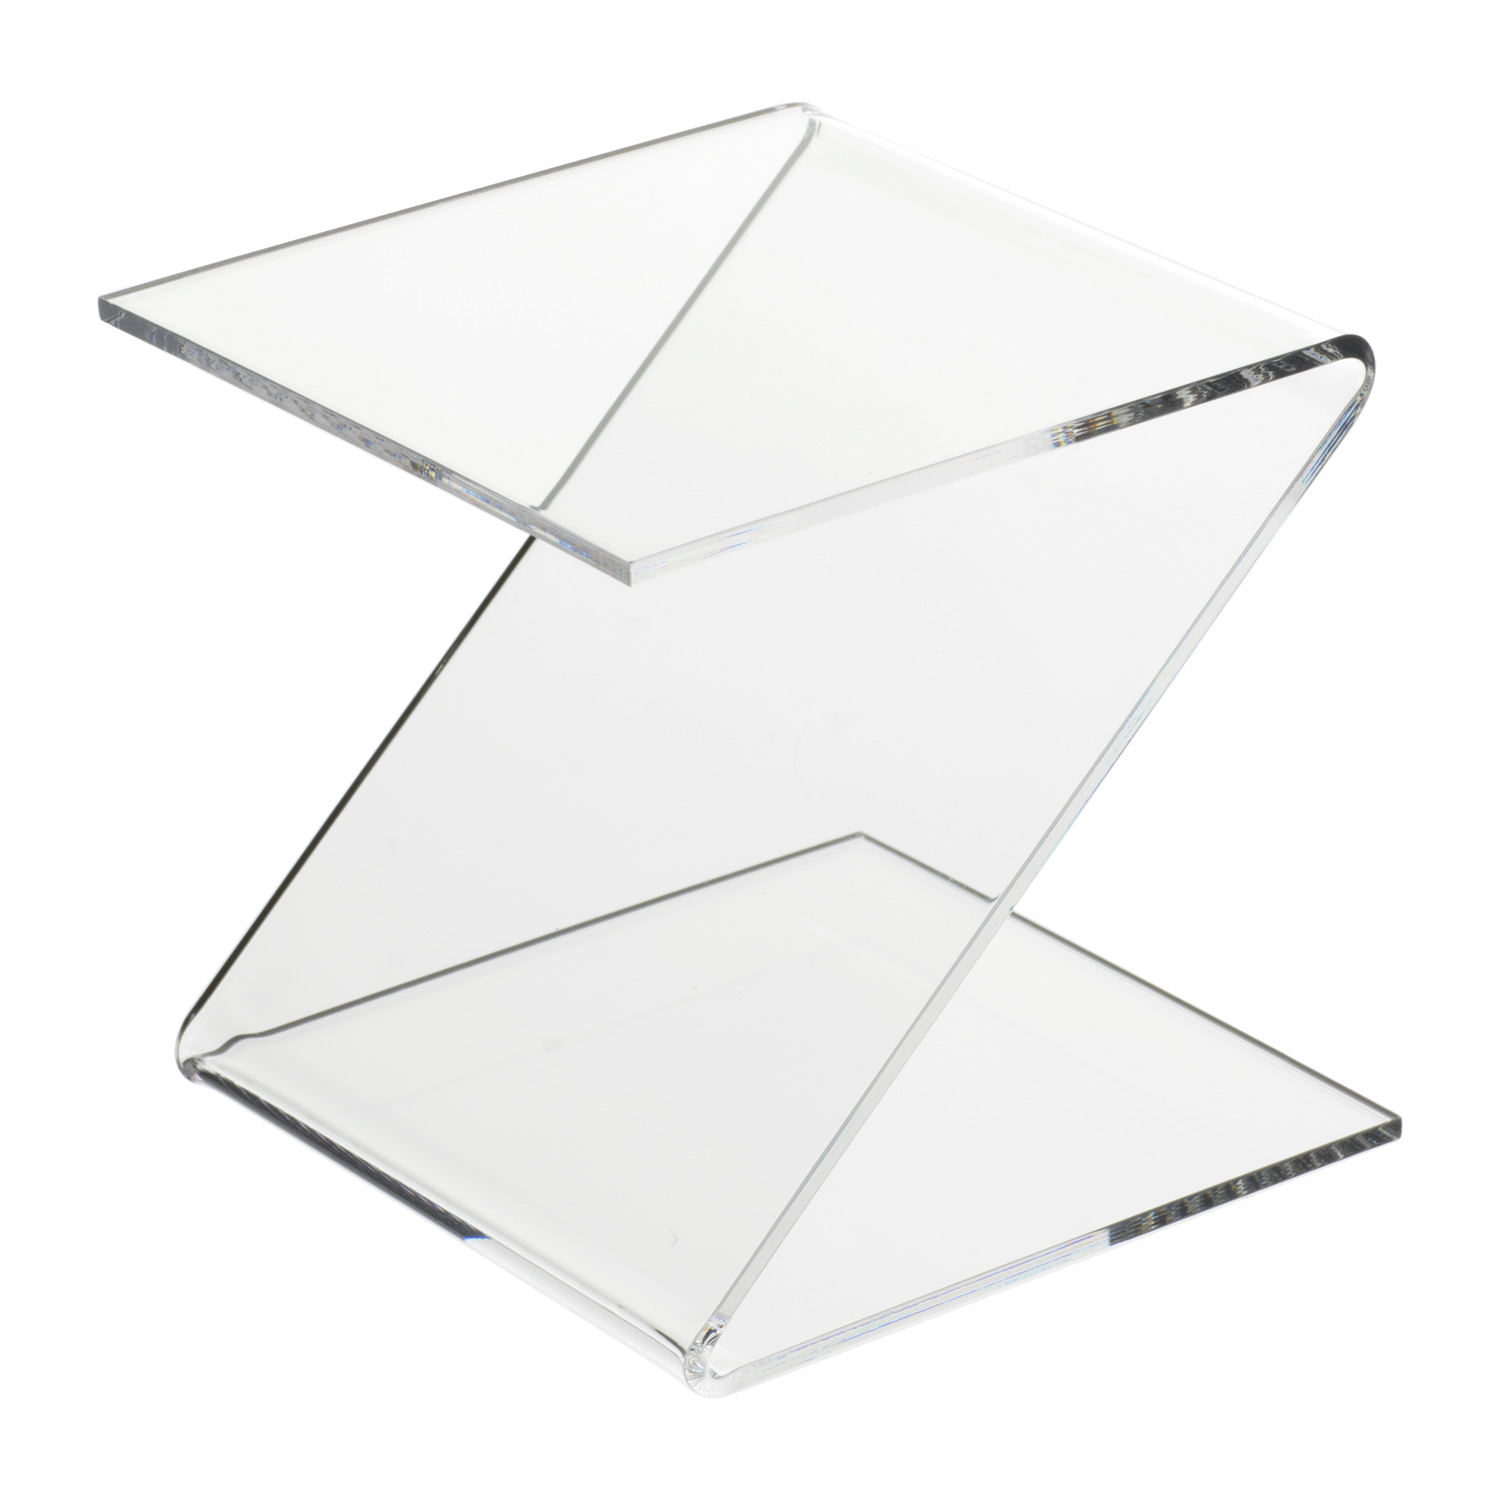 *10 Clear Acrylic Plastic Risers Display Stand Pedestal 2" x 2" x 2"